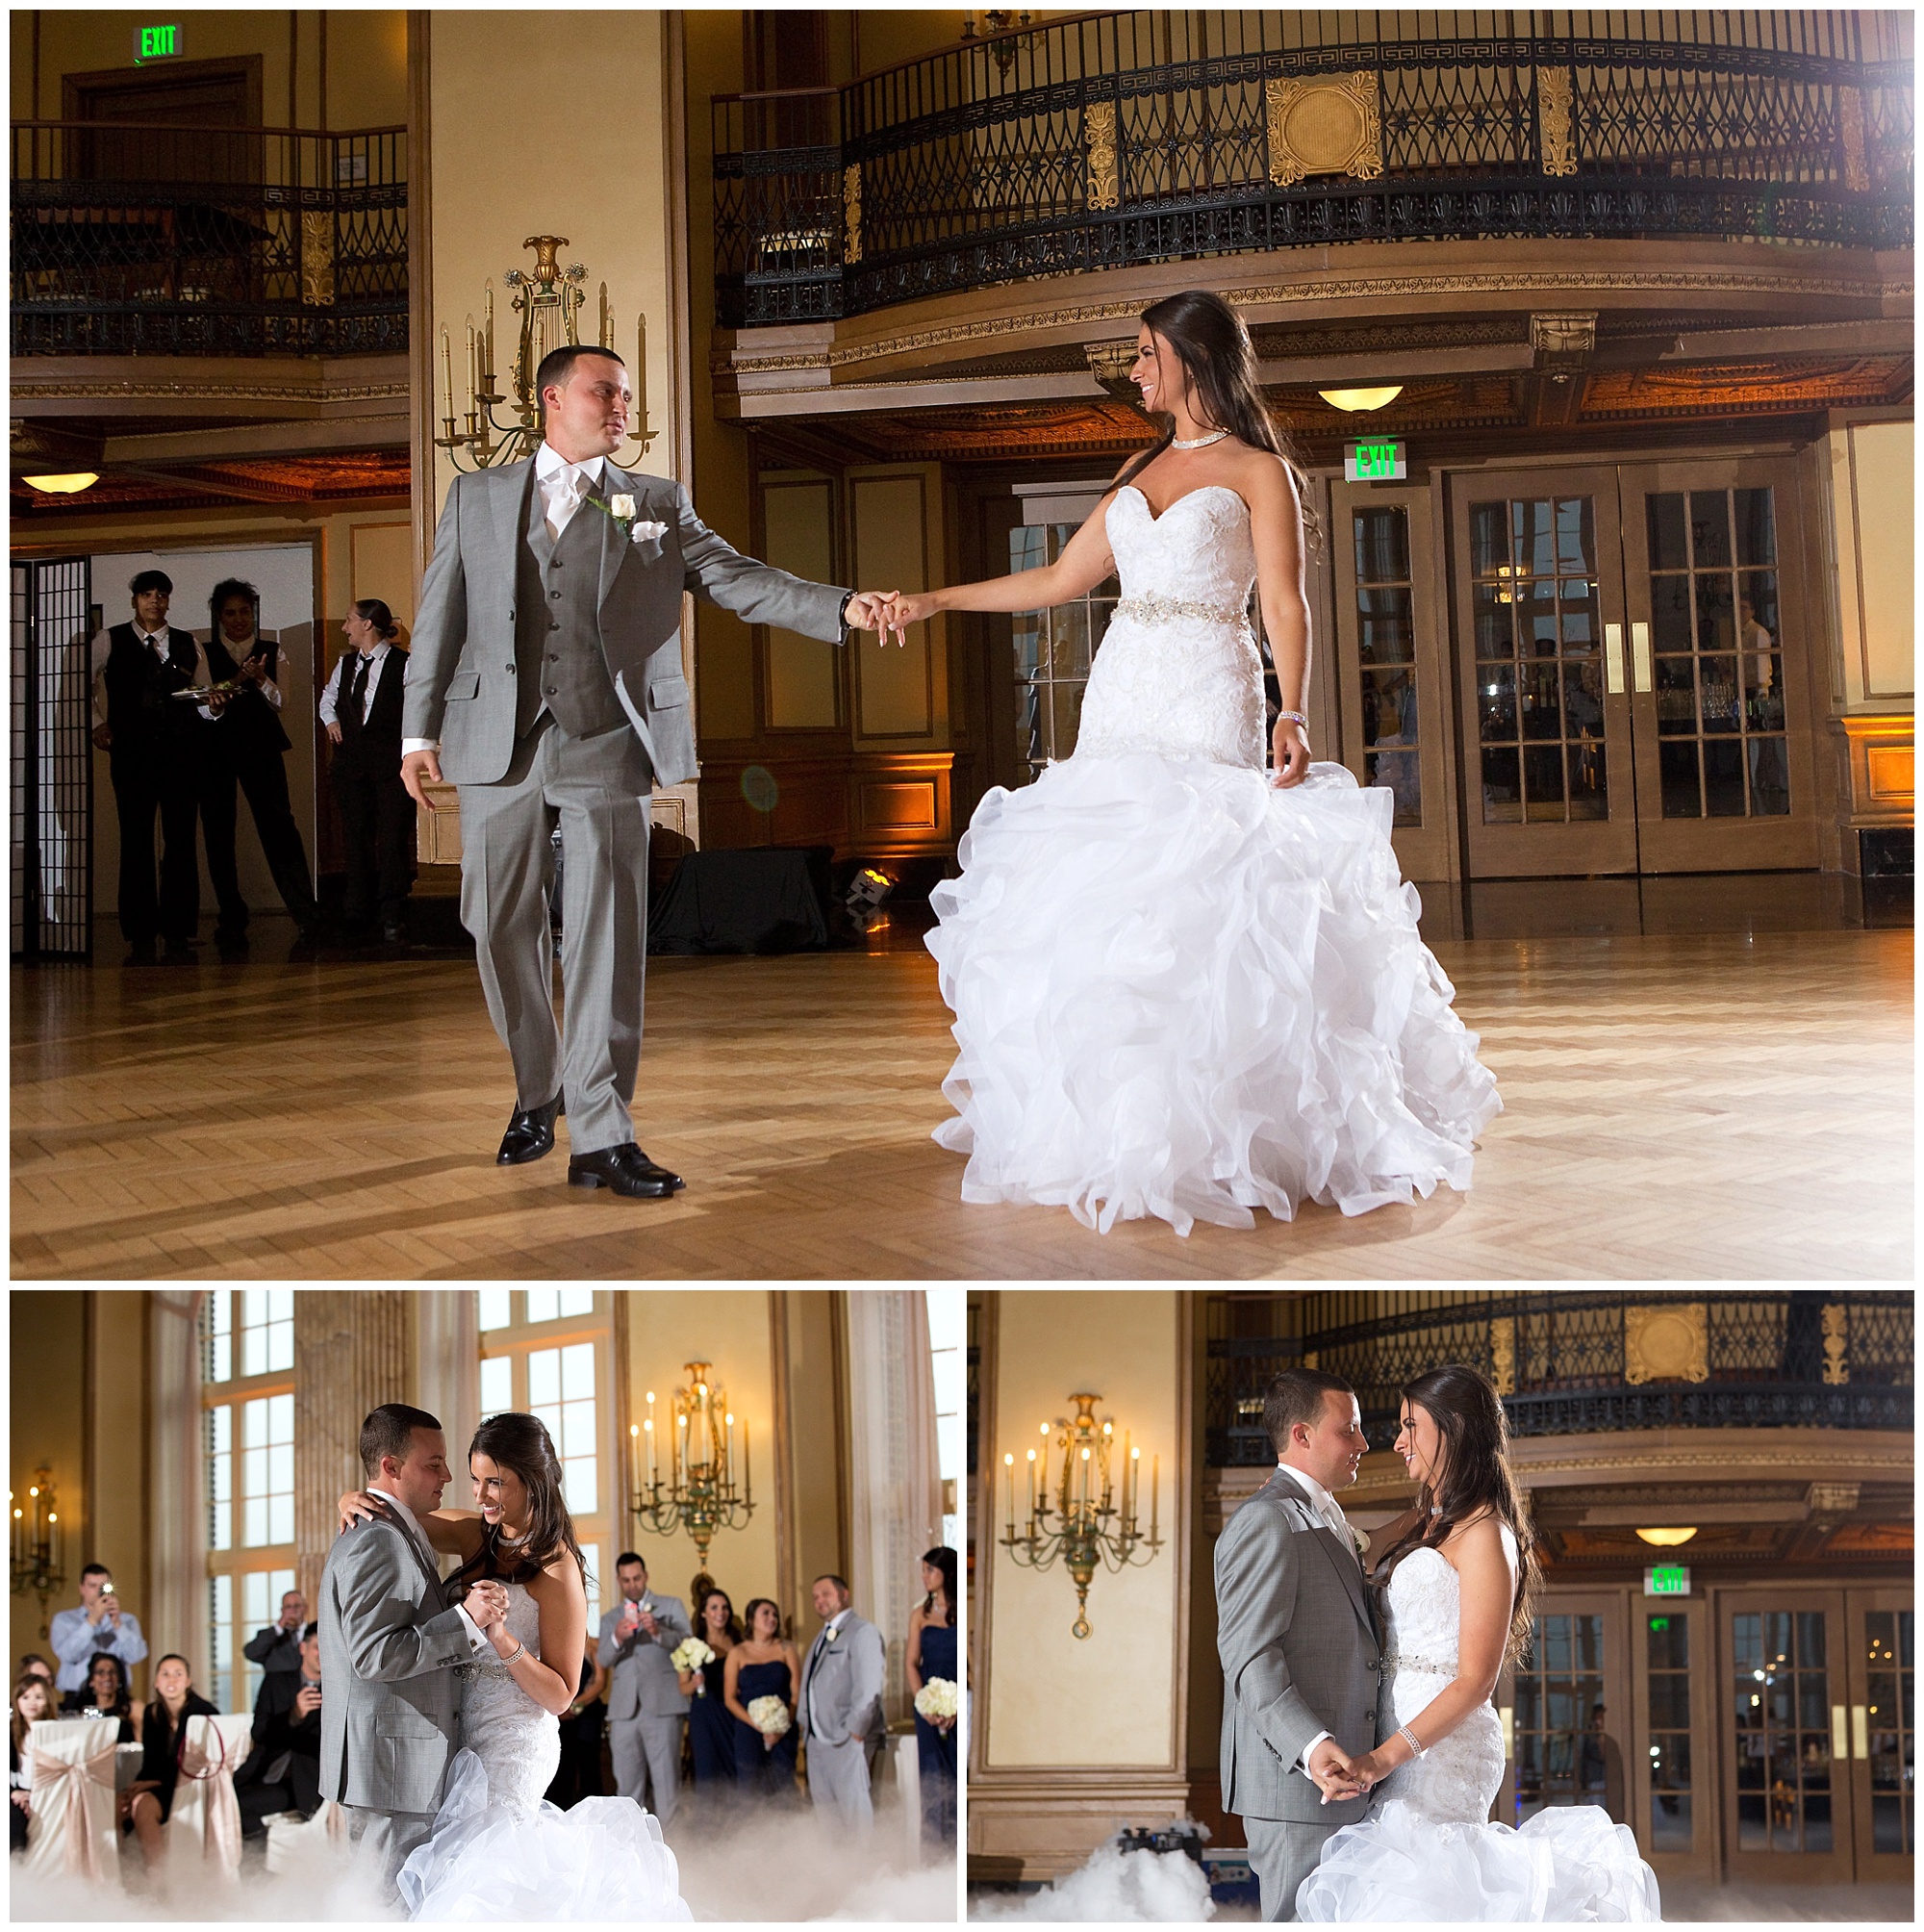 Photo of a bride and groom begining their first dance.